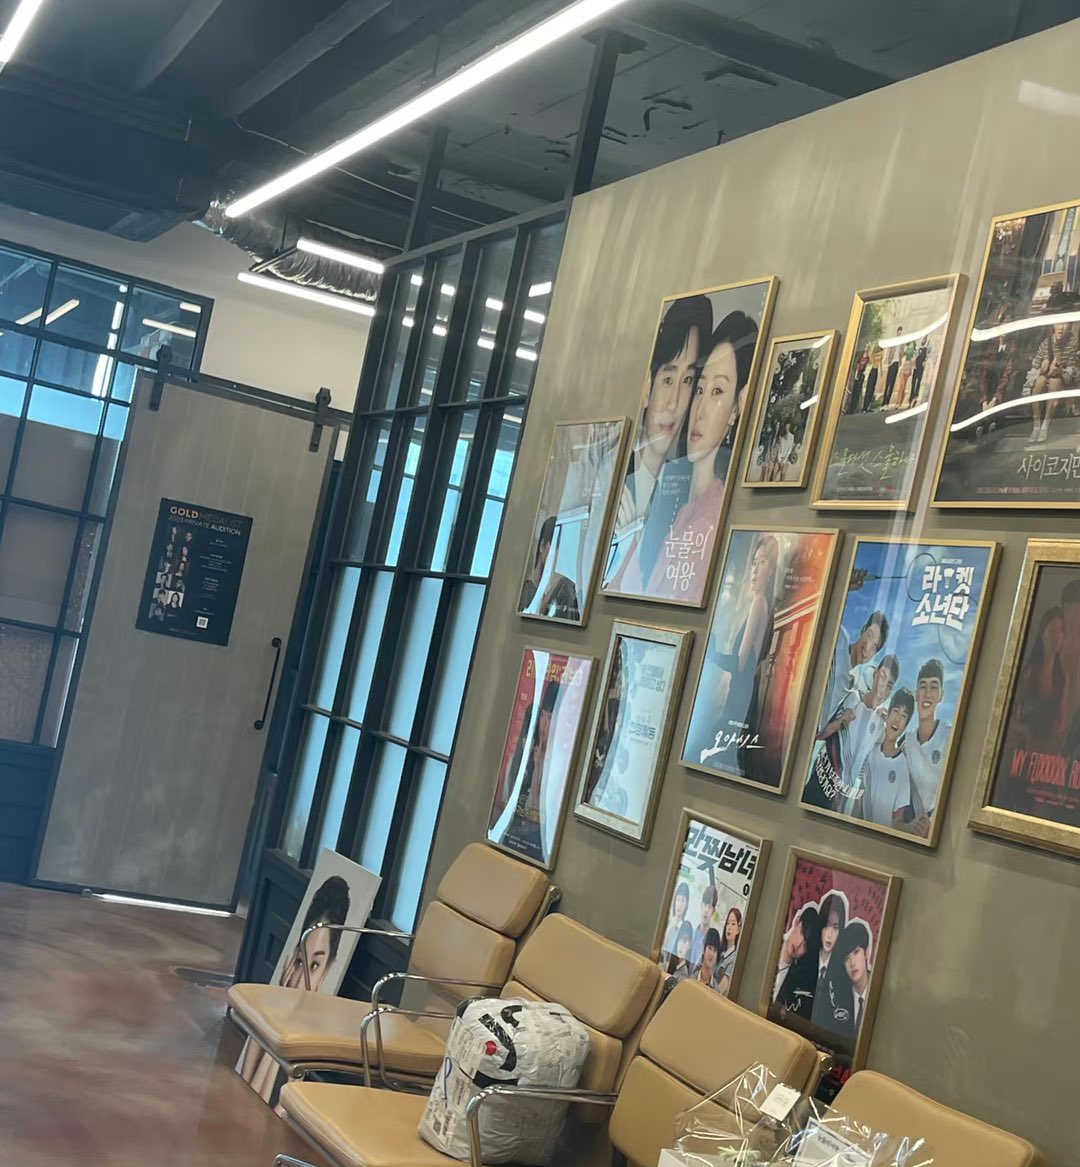 [#QueenOfTears] POSTER INSIDE THE GOLDMEDALIST BUILDING shared by one of the staffs 

#KimJiWon #KimSooHyun #SooWon #김수현 #김지원